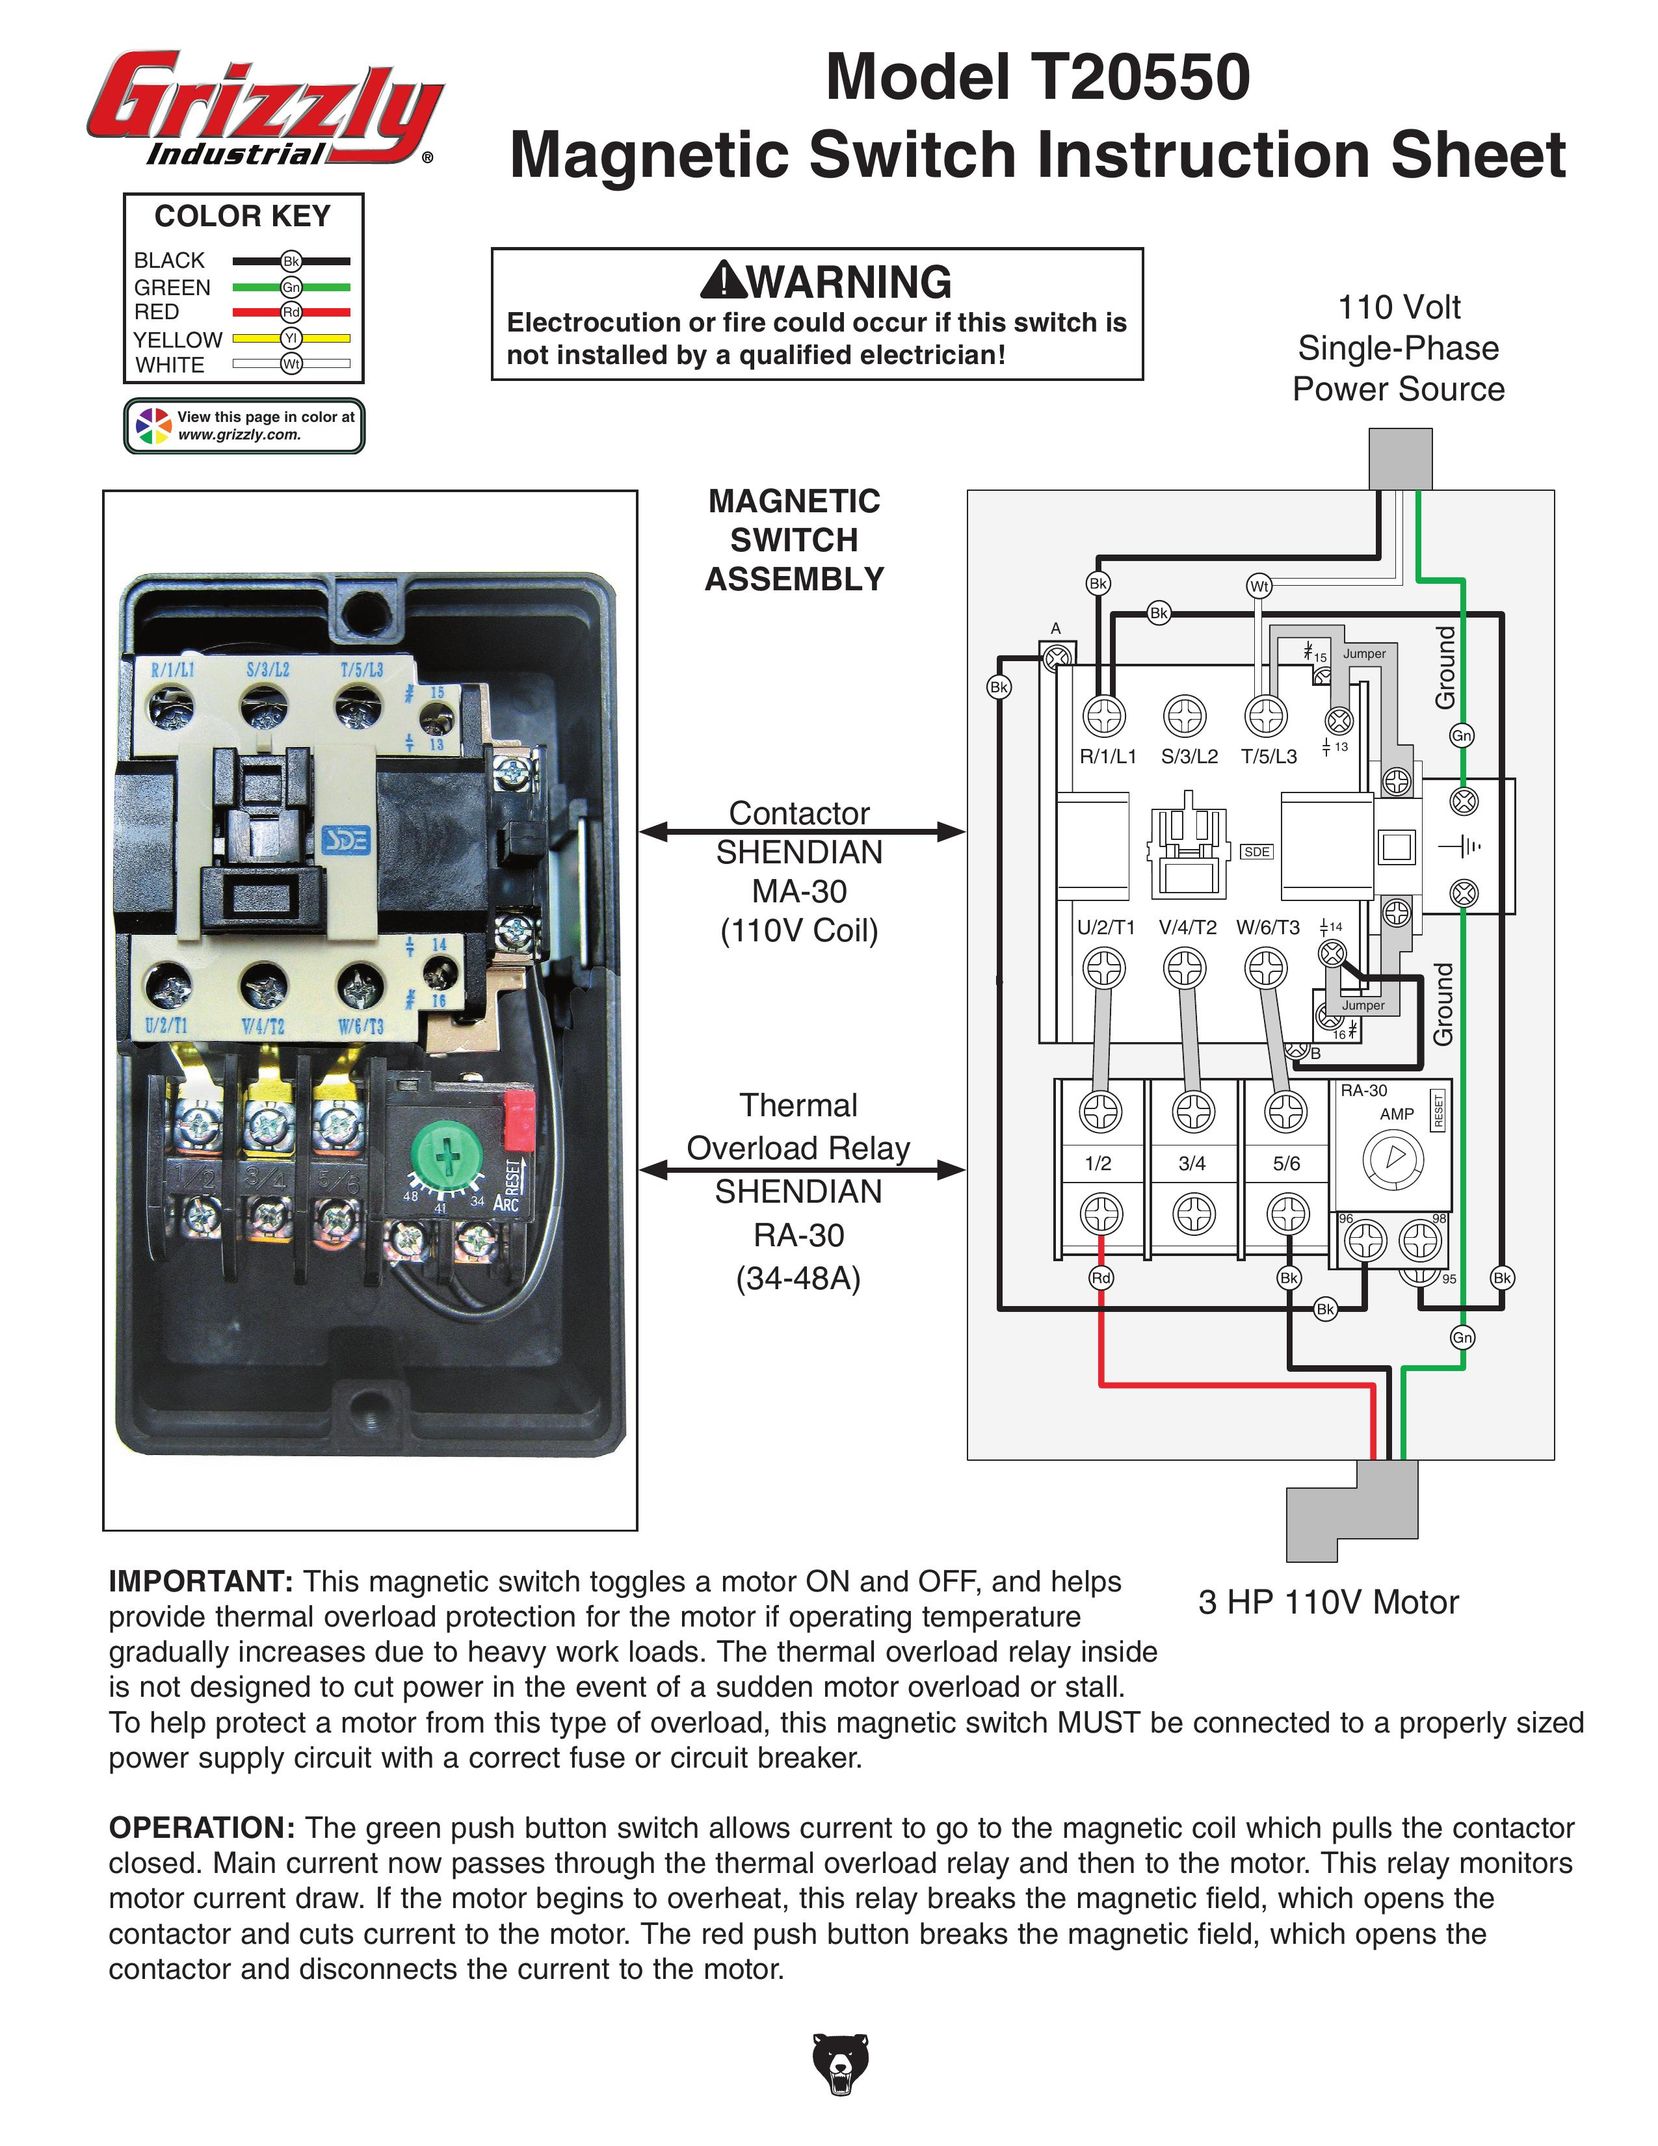 Grizzly T20550 Switch User Manual